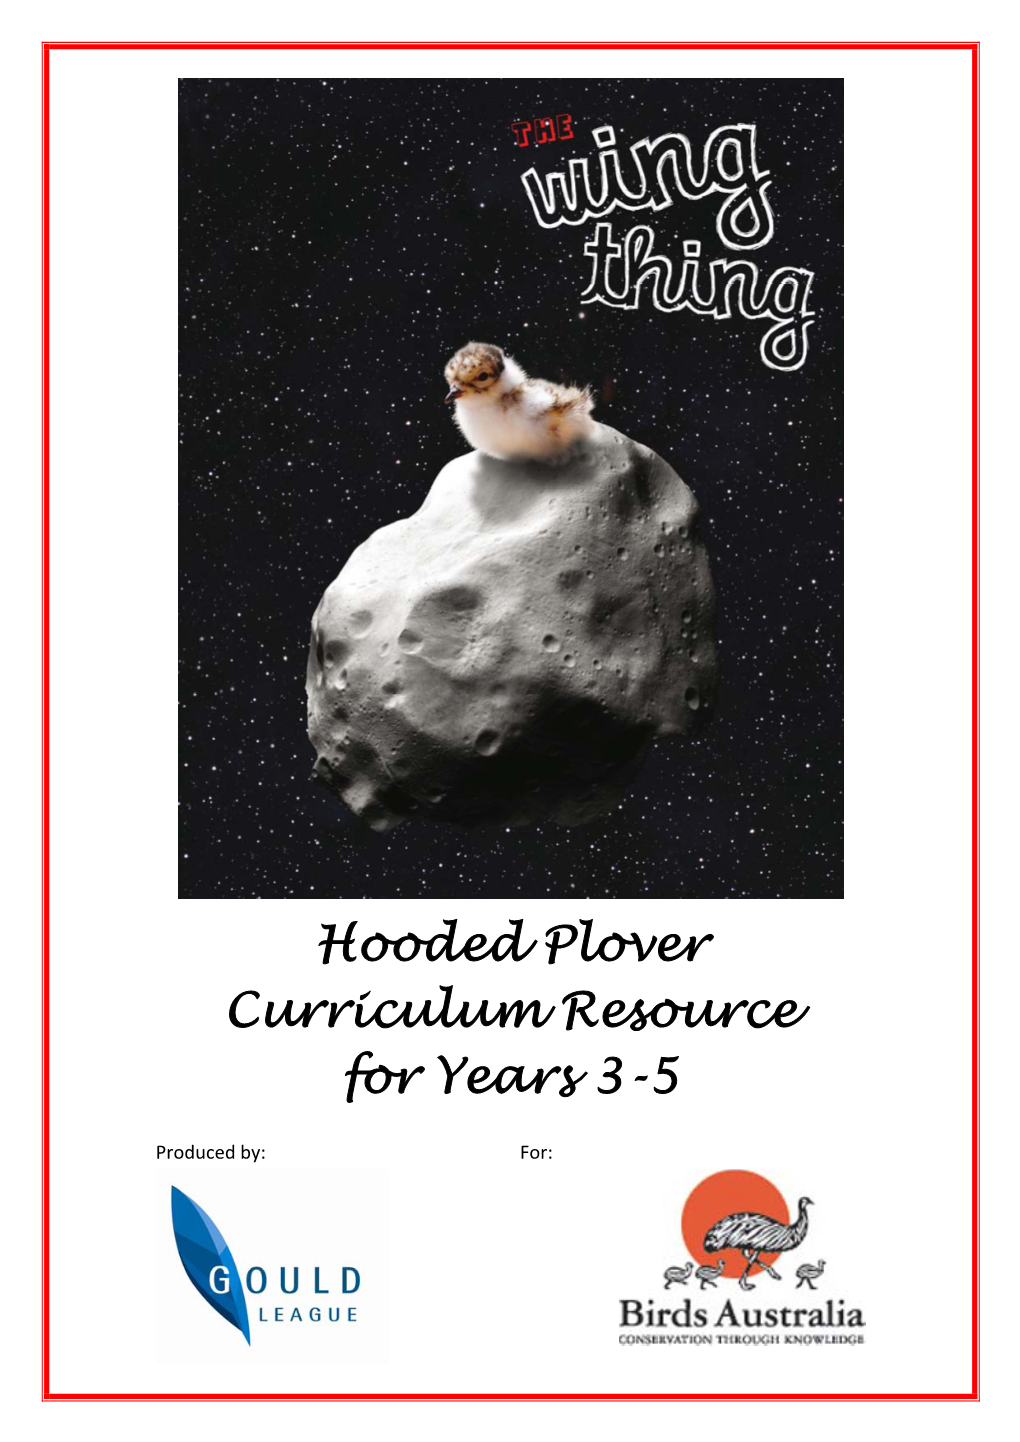 Hooded Plover Curriculum Resource for Years 3-5